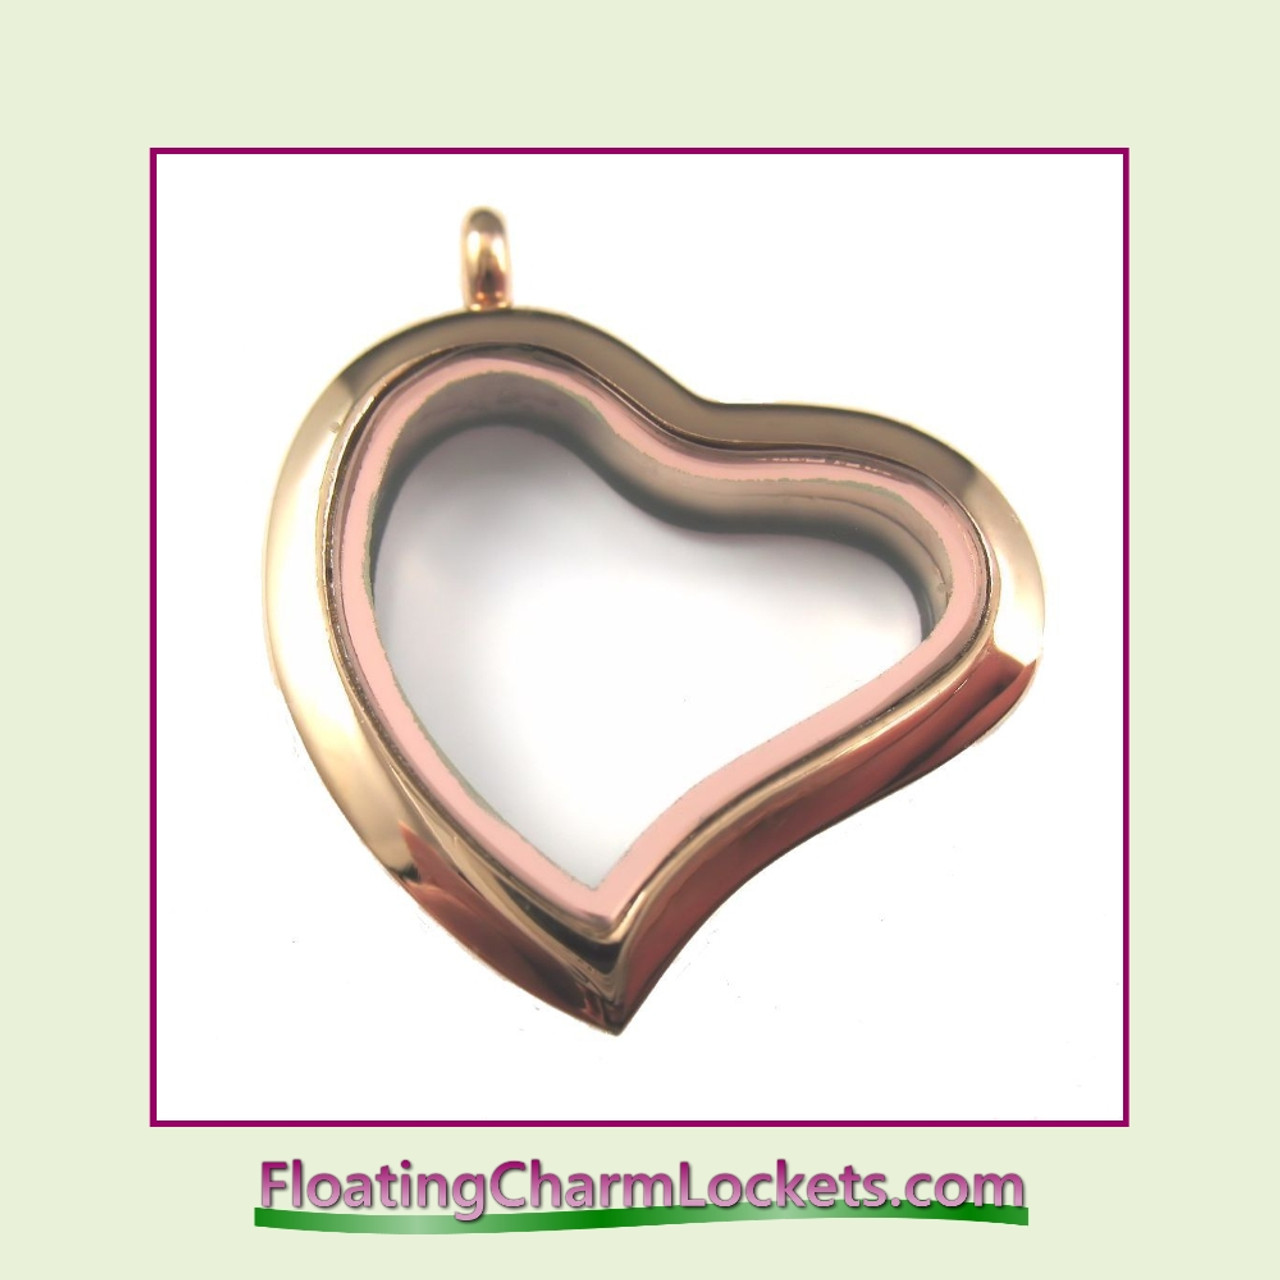 Plain Rose Curved Heart Stainless Steel Floating Charm Locket